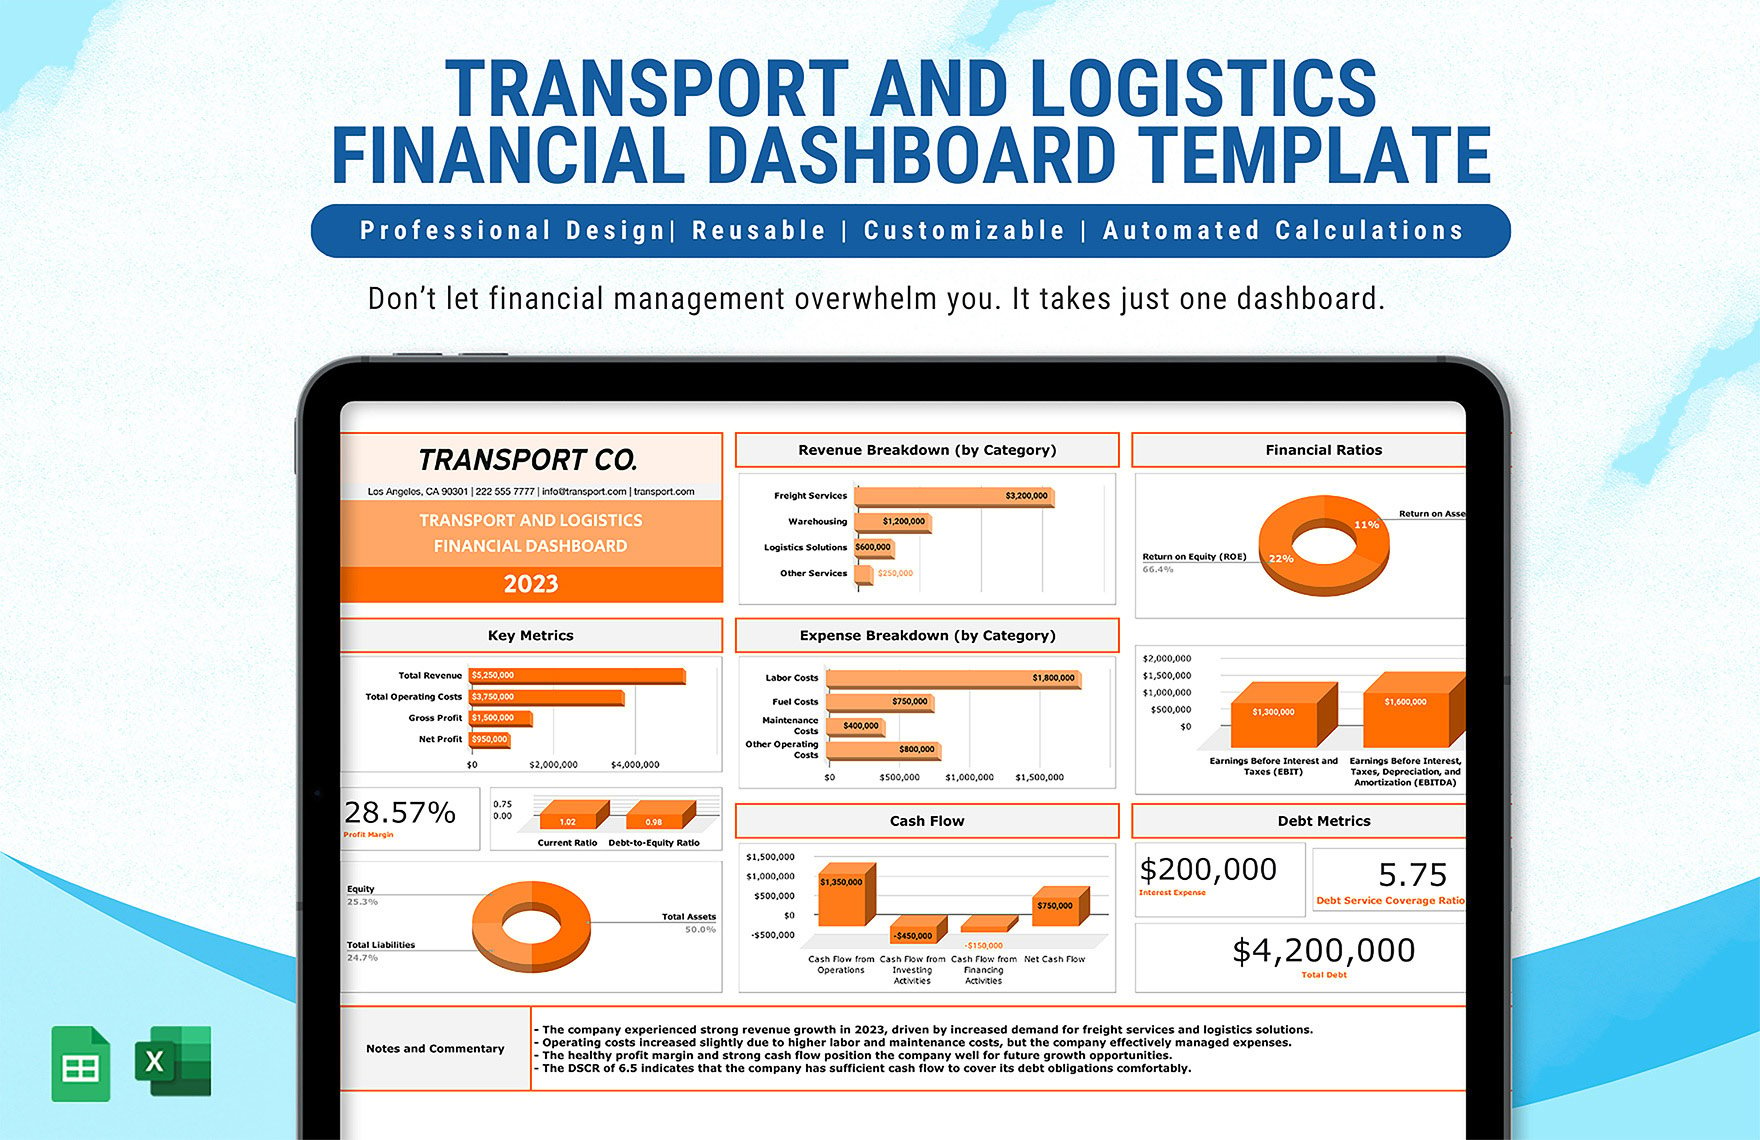 Transport and Logistics Financial Dashboard Template